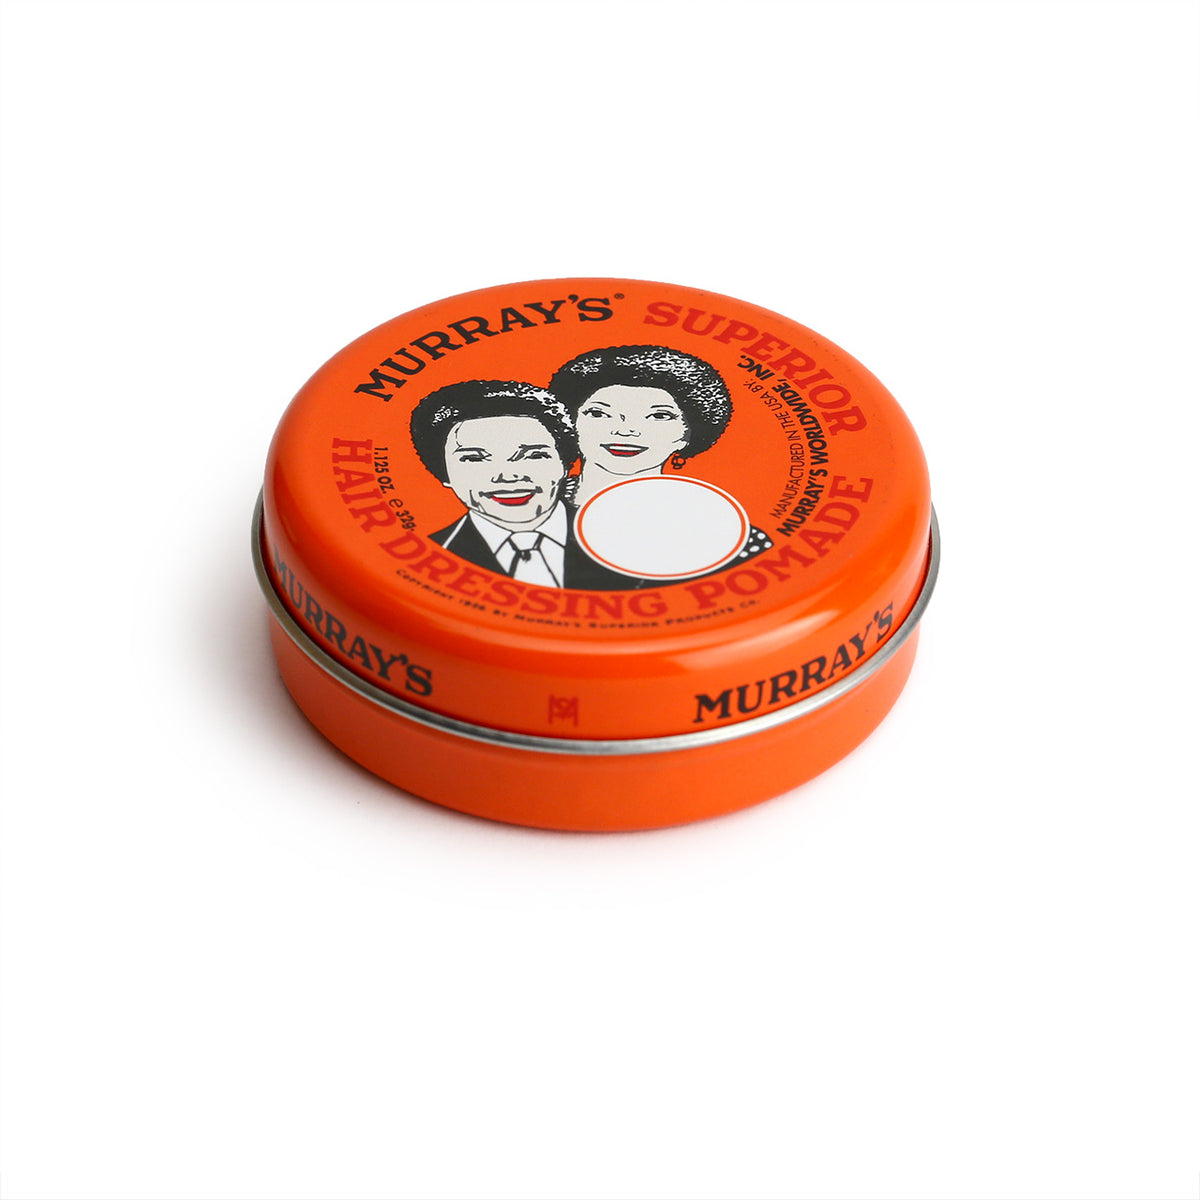 Murrays 32g pocket-sized tin, three-quarter angle showing the small flat tin with retro graphics